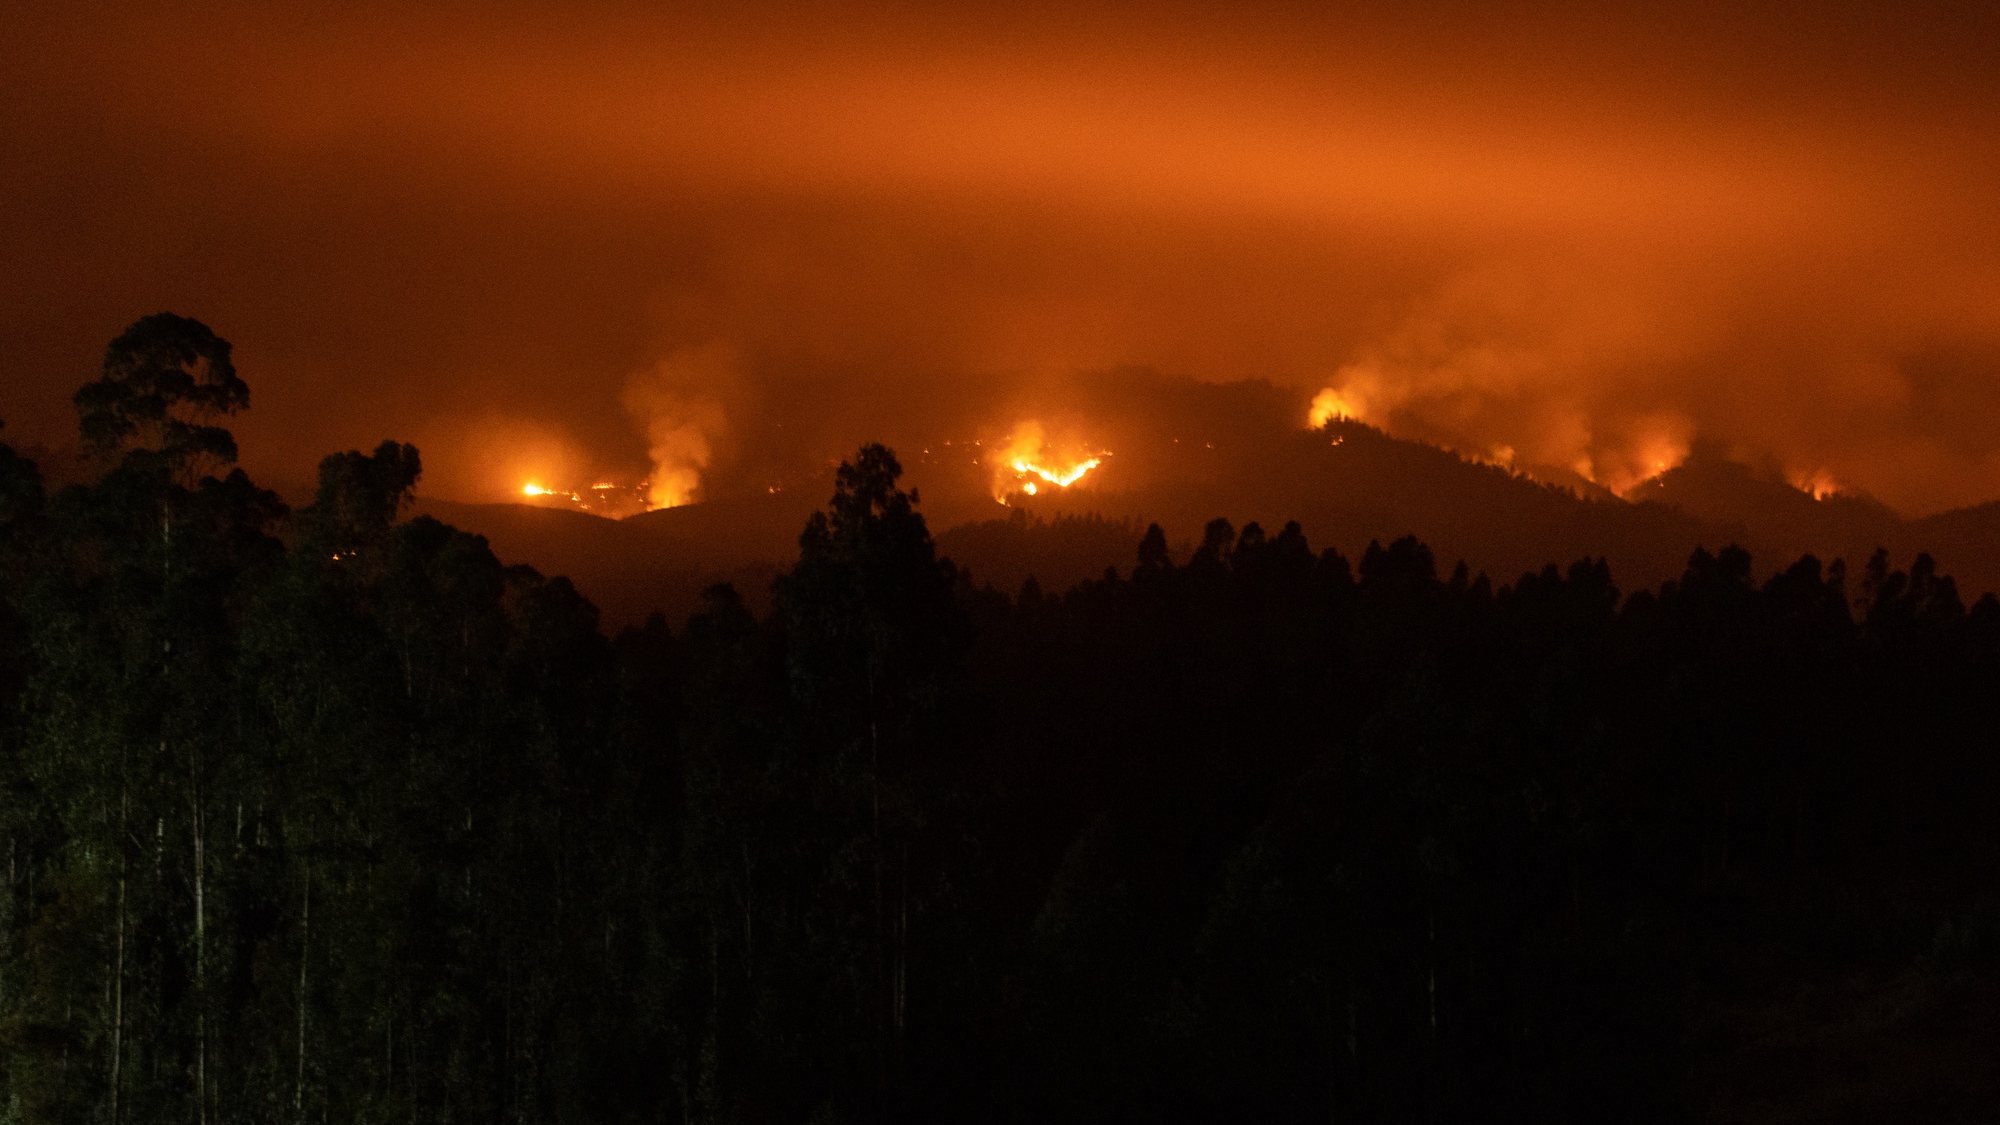 epa10448873 A forest fire burns in Alto de Menque, Biobio Region, Chile, 05 February 2023. Ongoing forest fires in Chile have destroyed more than 45,000 hectares of land since December 2022, mainly in the regions of Nuble, Biobio and La Araucania, areas of intense agricultural and forestry activity located between 400 and 700 kilometers south of the capital Santiago.  EPA/ESTEBAN PAREDES DRAKE